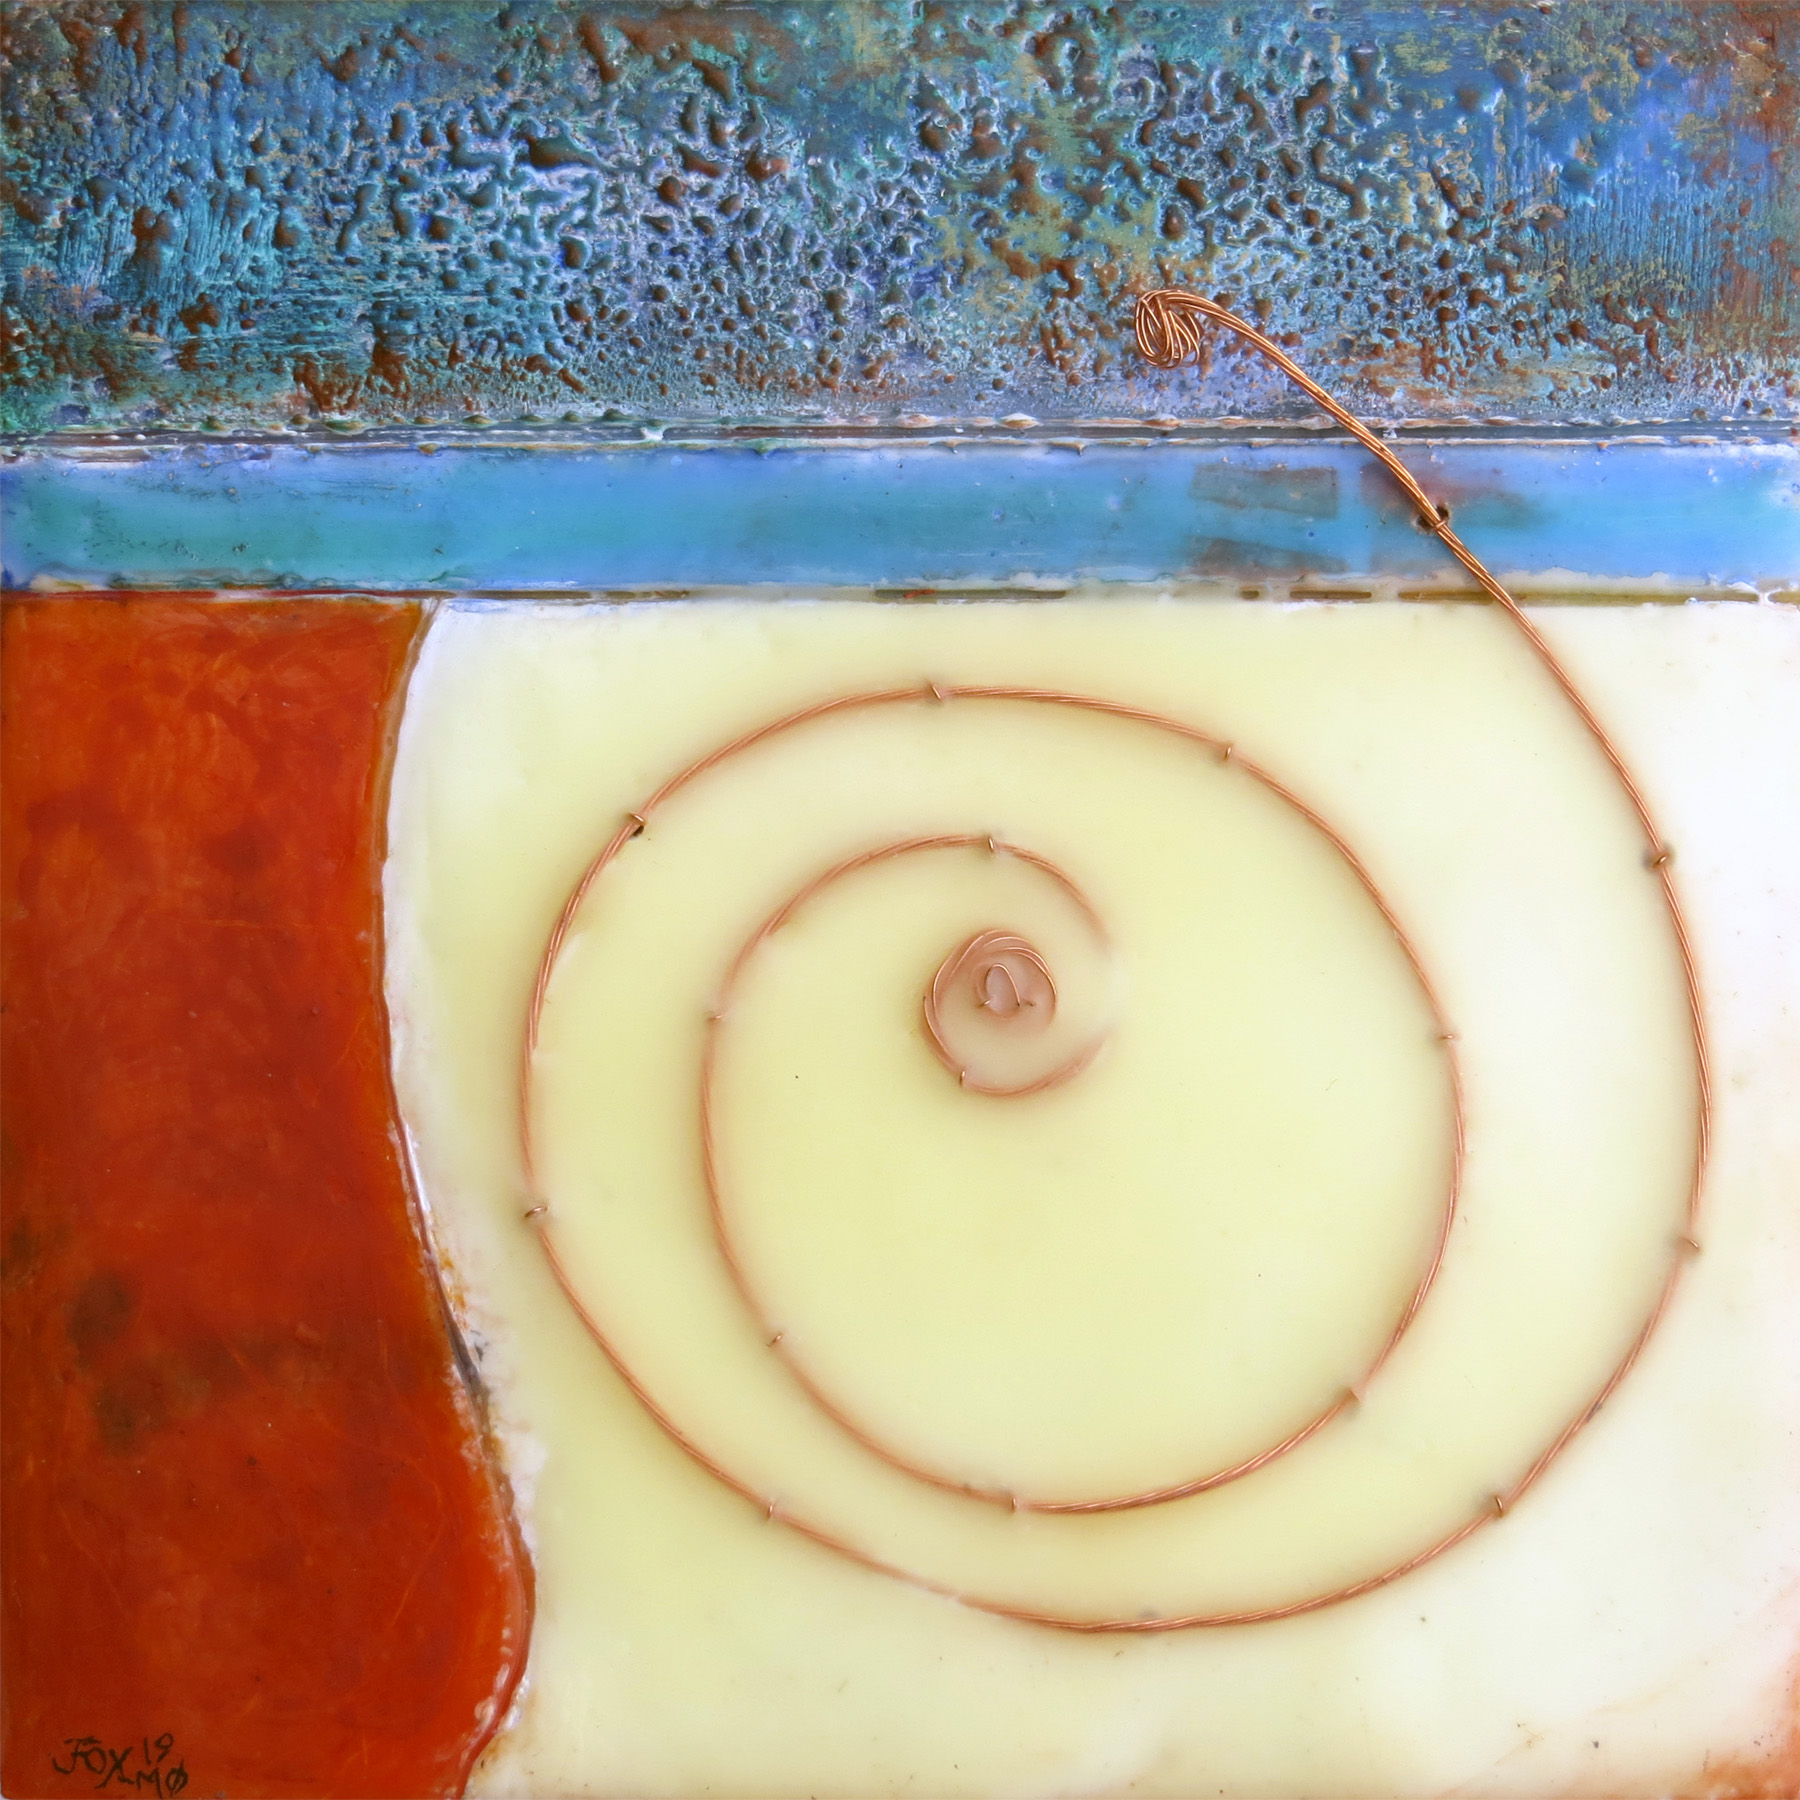 An encaustic representational painting "Here I Go" by Janet Fox with rust color rock, ivory sand, turquoise sea and sky, and copper wire launching into flight